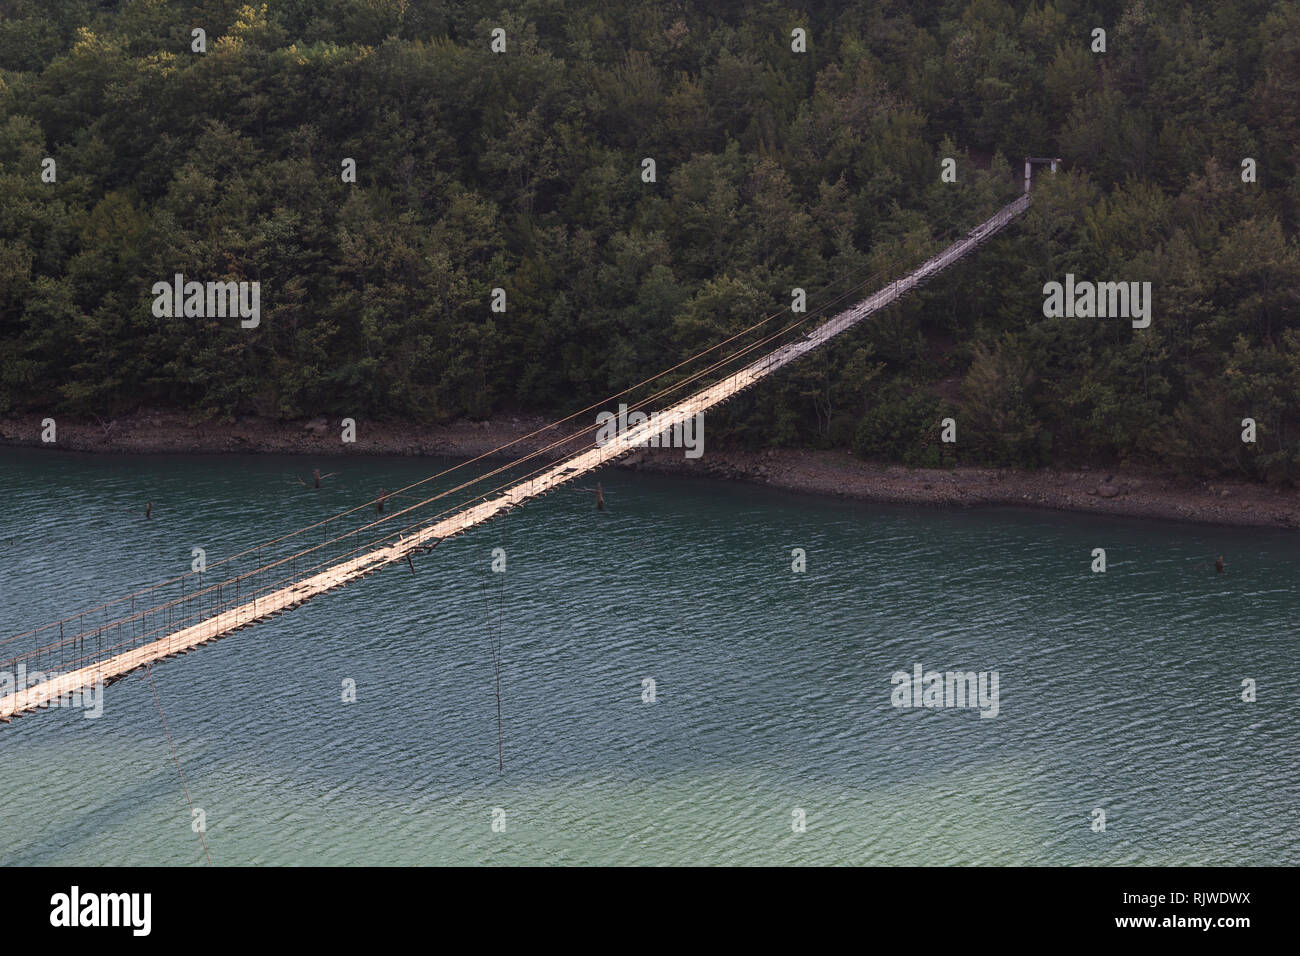 Albania: Decaying Hanging or suspension bridge with loose wires and broken wooden planks Stock Photo